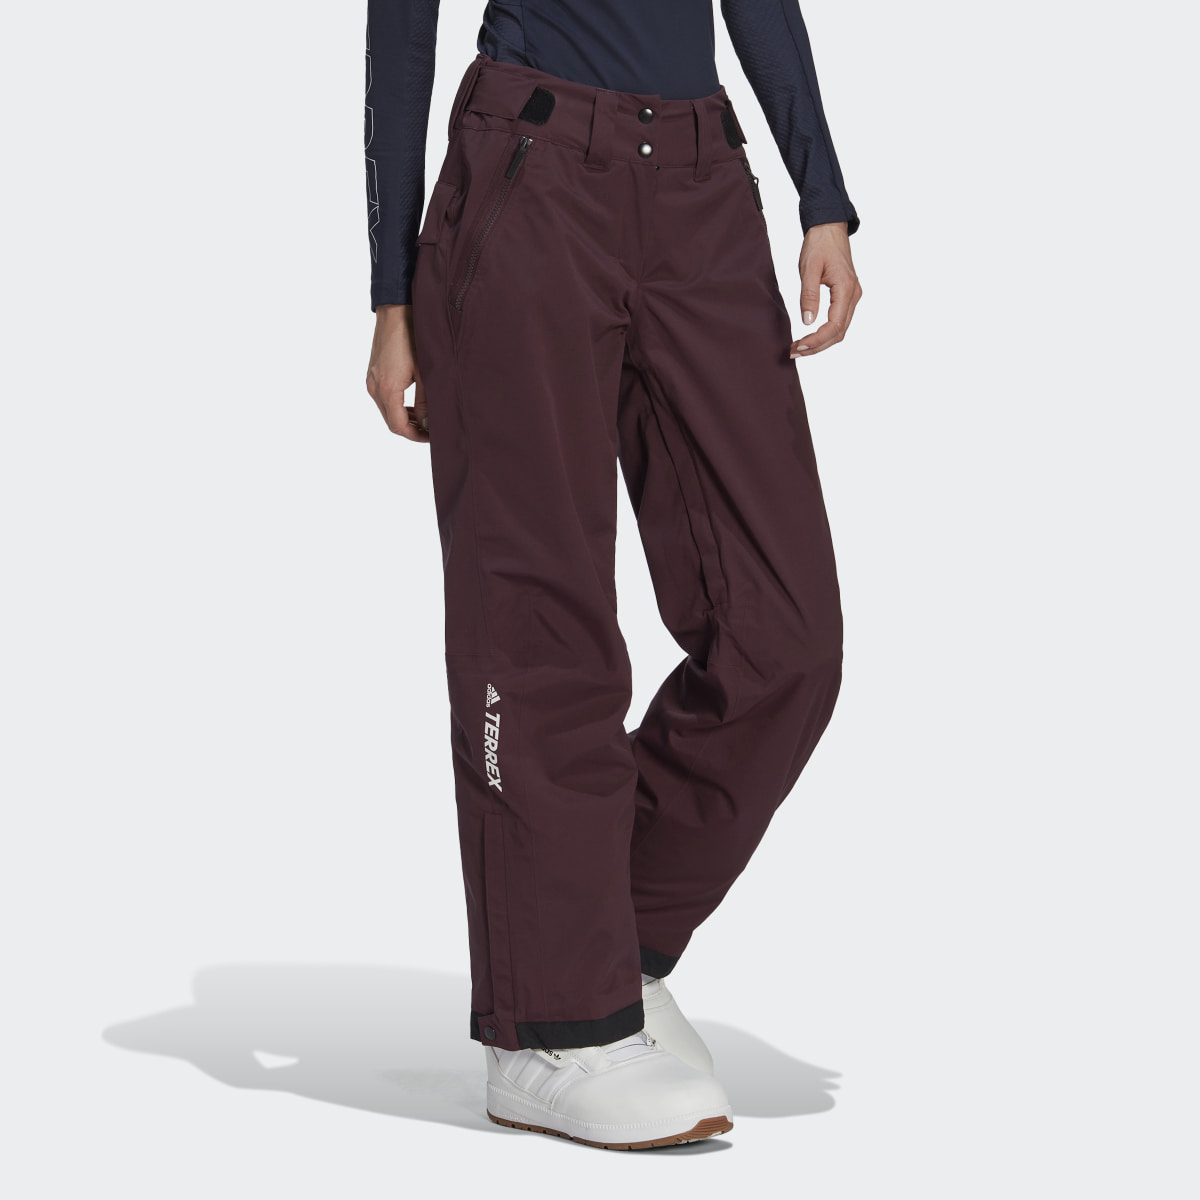 Adidas Resort Two-Layer Insulated Stretch Pants. 4